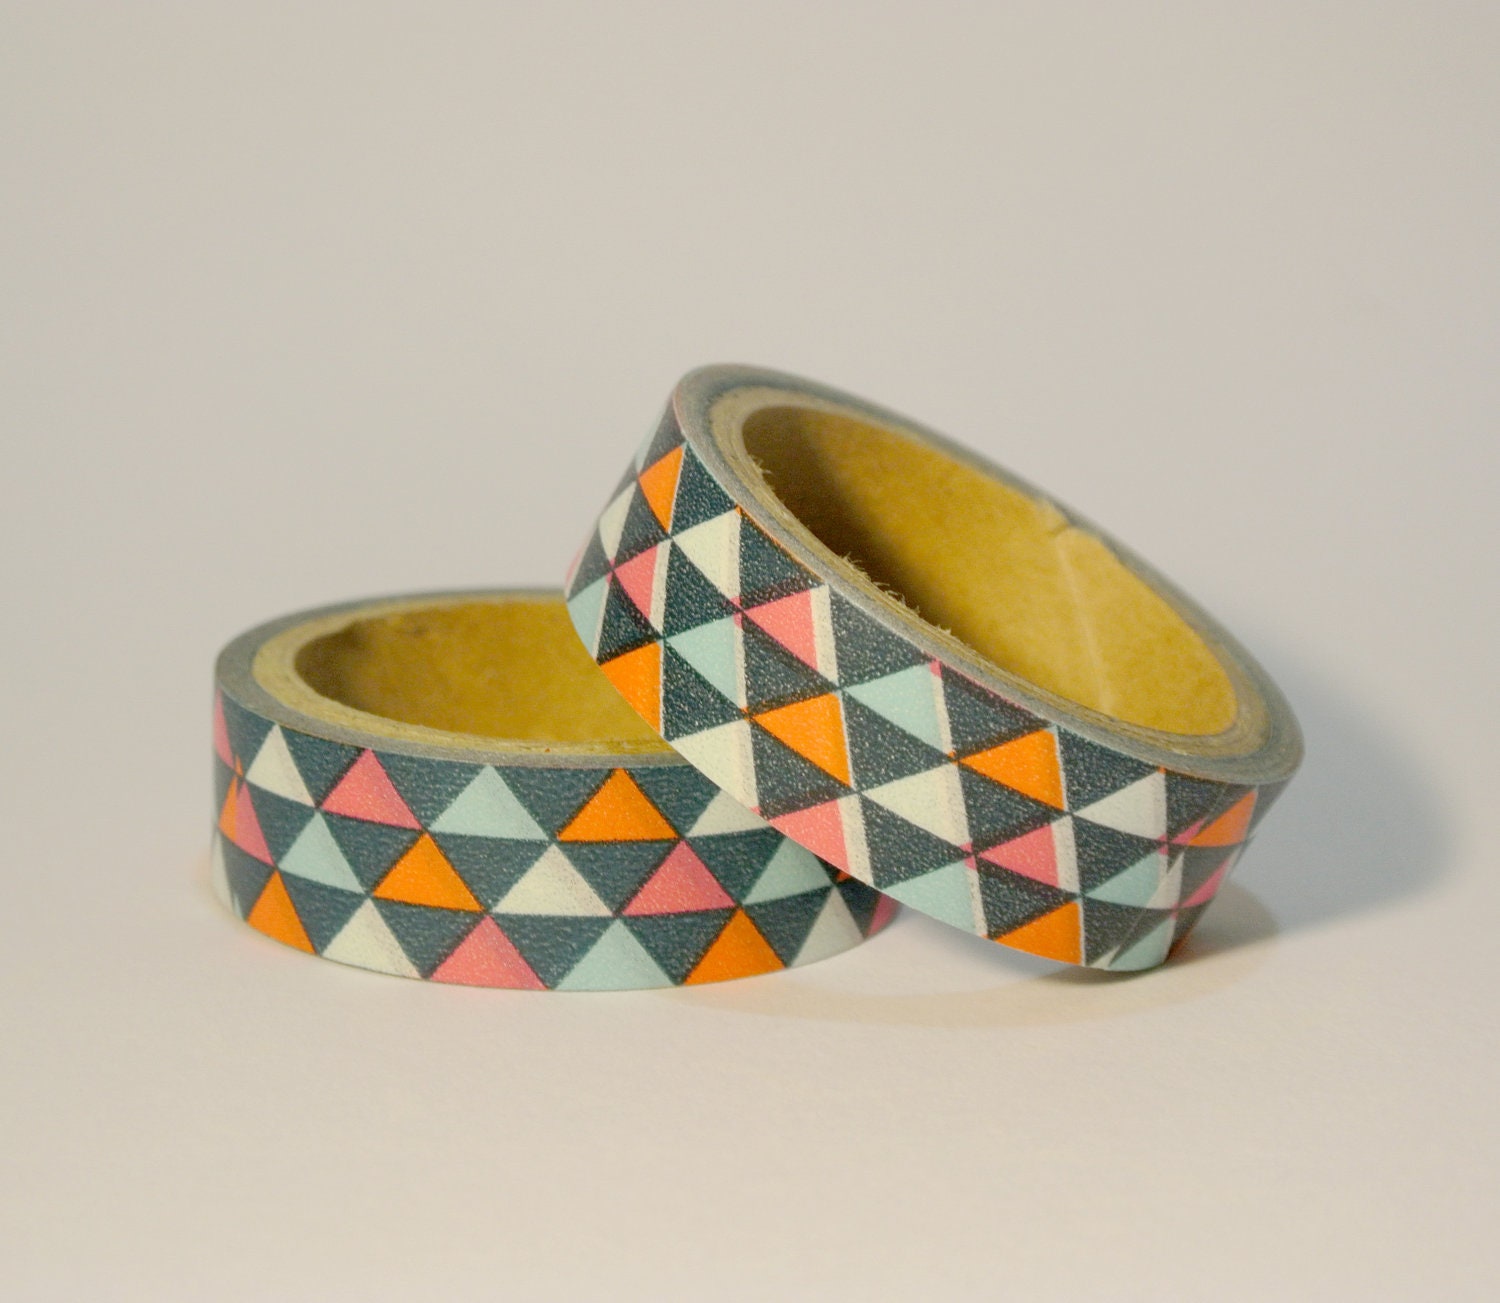 Colour Triangles Washi Tapes / Japanese Masking Tapes - whimsicalcraftss